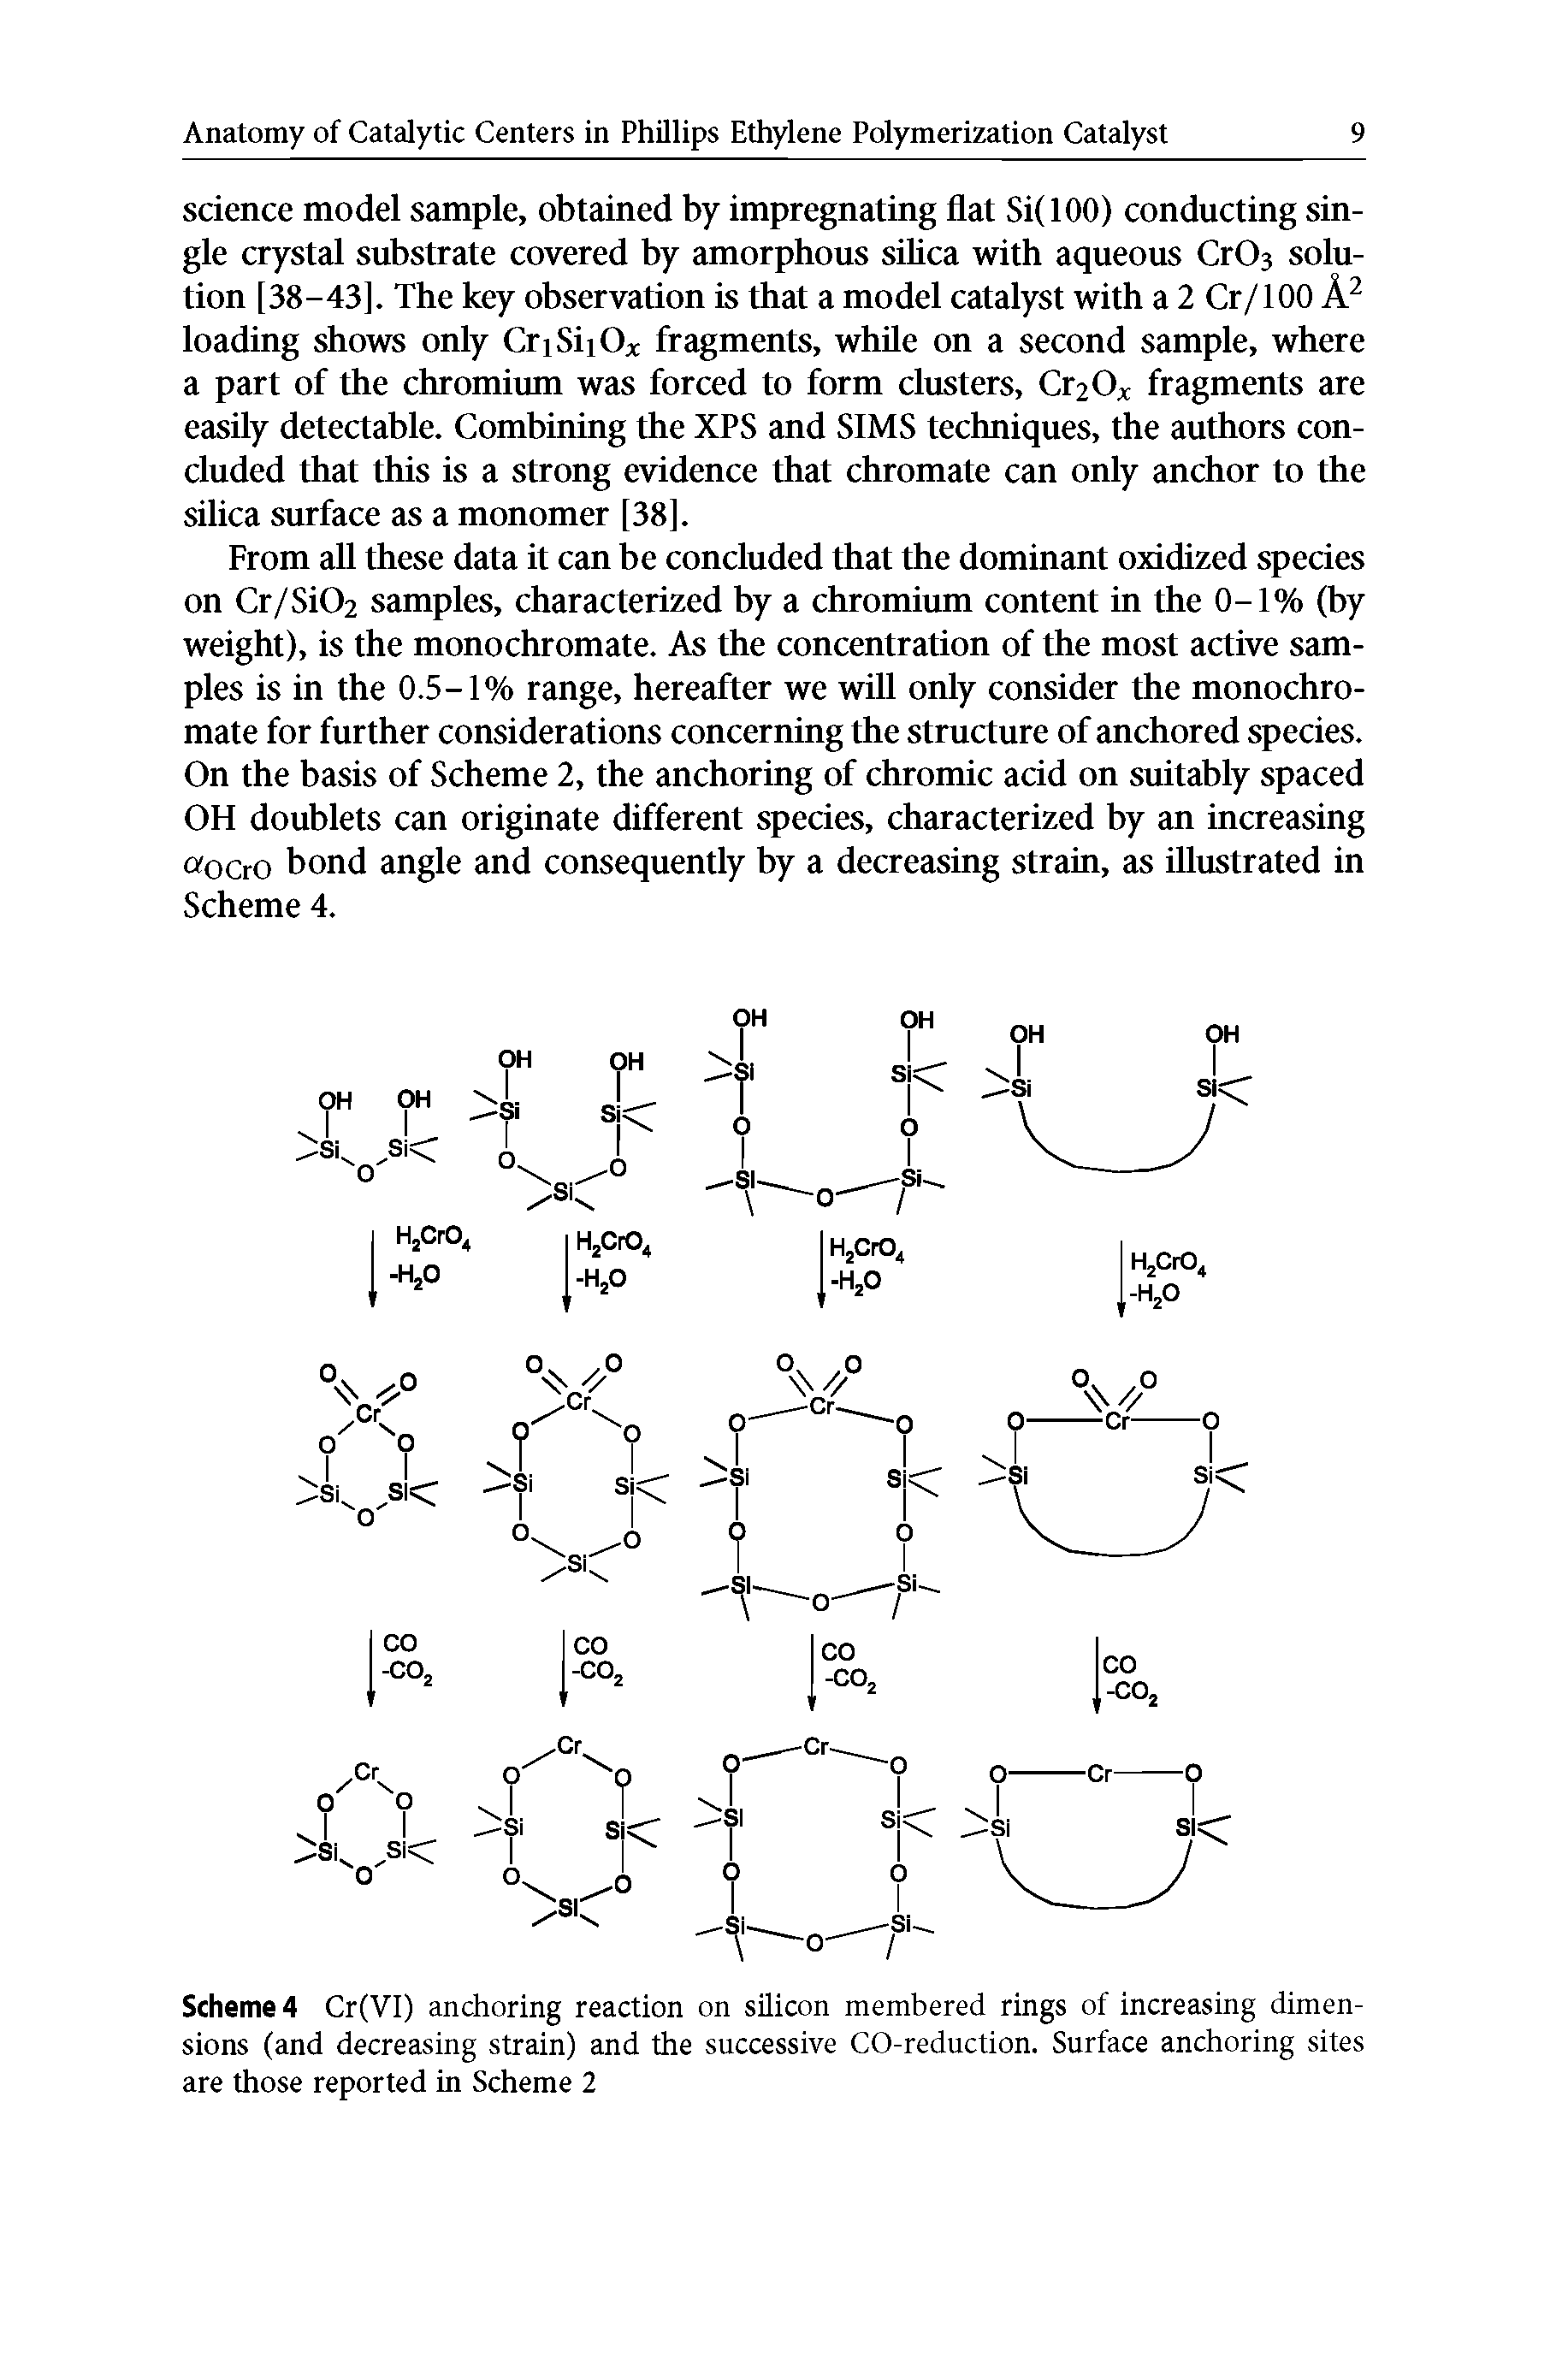 Scheme 4 Cr(VI) anchoring reaction on silicon membered rings of increasing dimensions (and decreasing strain) and the successive CO-reduction. Surface anchoring sites are those reported in Scheme 2...